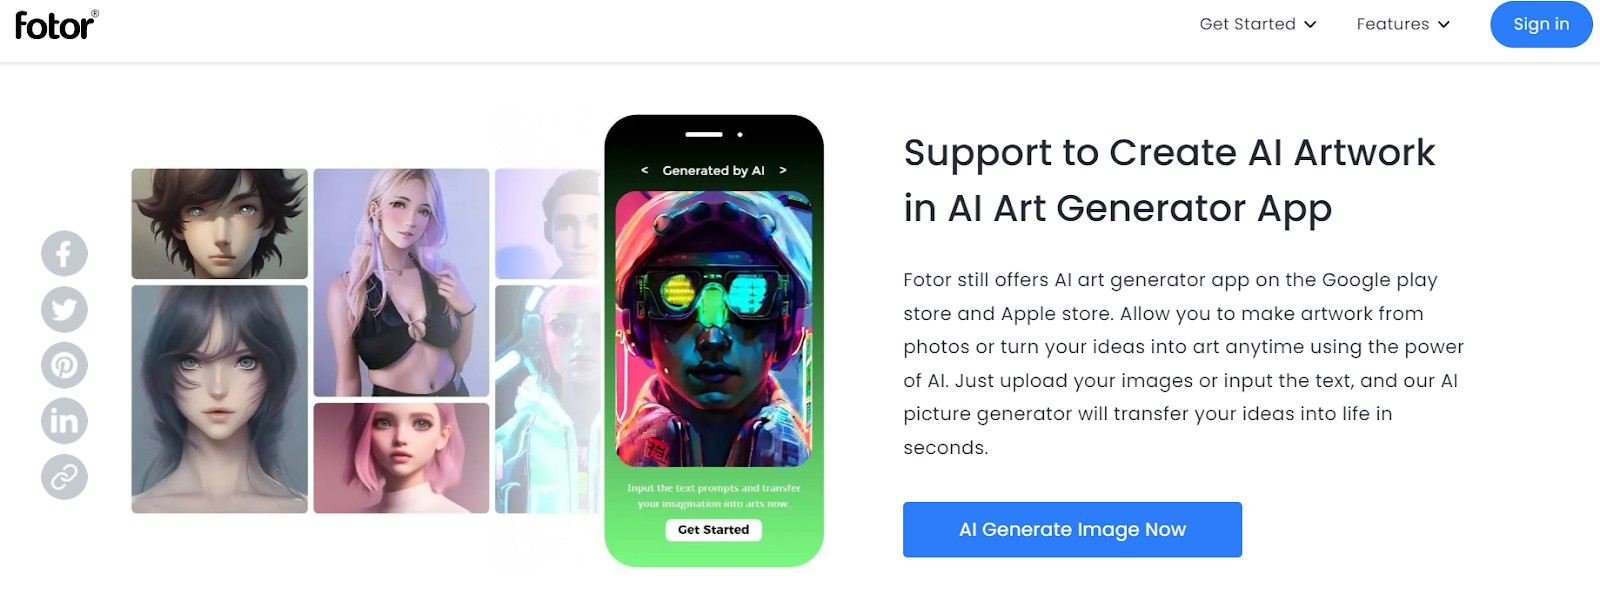 Offers Support To Create AI Artwork